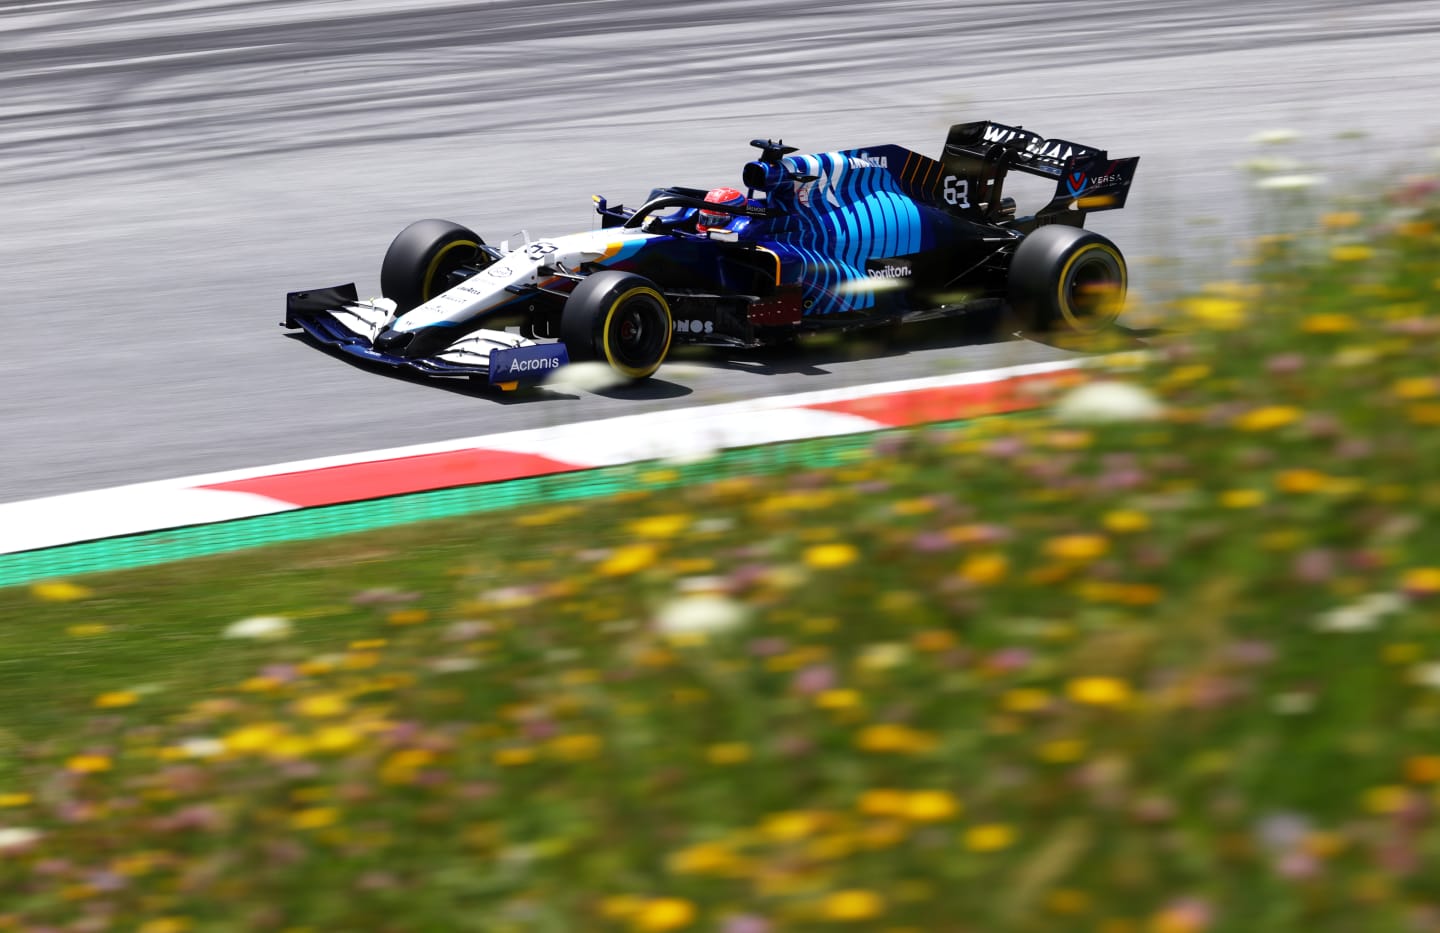 SPIELBERG, AUSTRIA - JUNE 26: George Russell of Great Britain driving the (63) Williams Racing FW43B Mercedes on track during final practice ahead of the F1 Grand Prix of Styria at Red Bull Ring on June 26, 2021 in Spielberg, Austria. (Photo by Clive Rose/Getty Images)